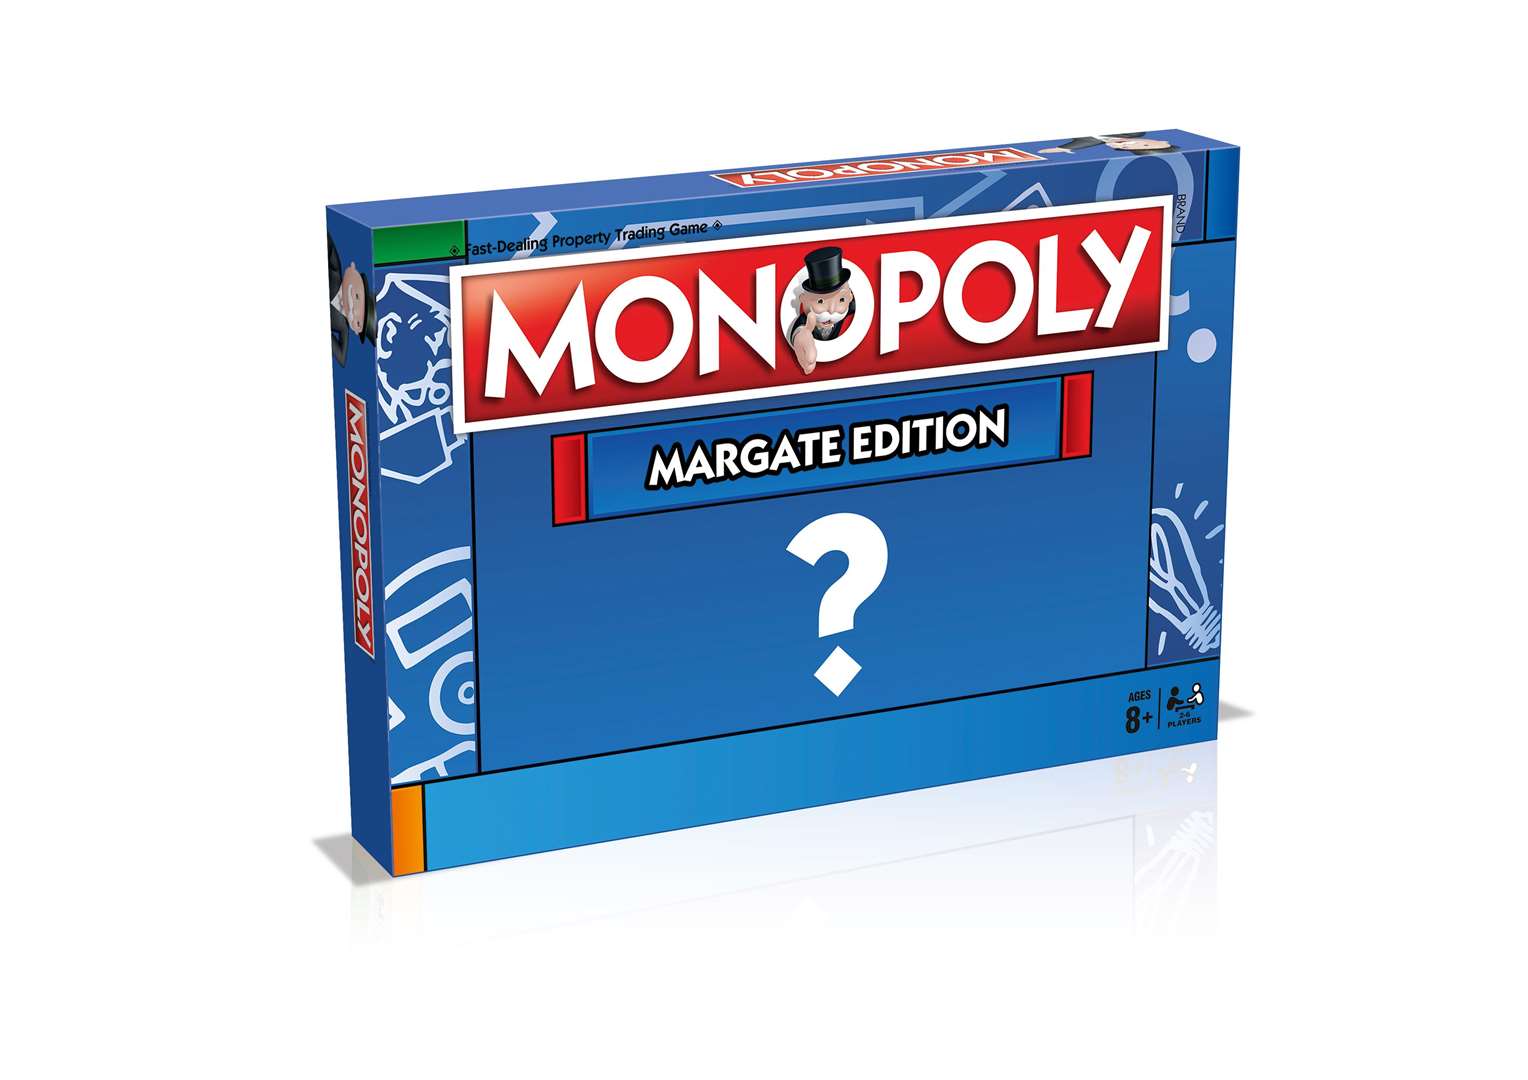 Margate is to get its own Monopoly edition